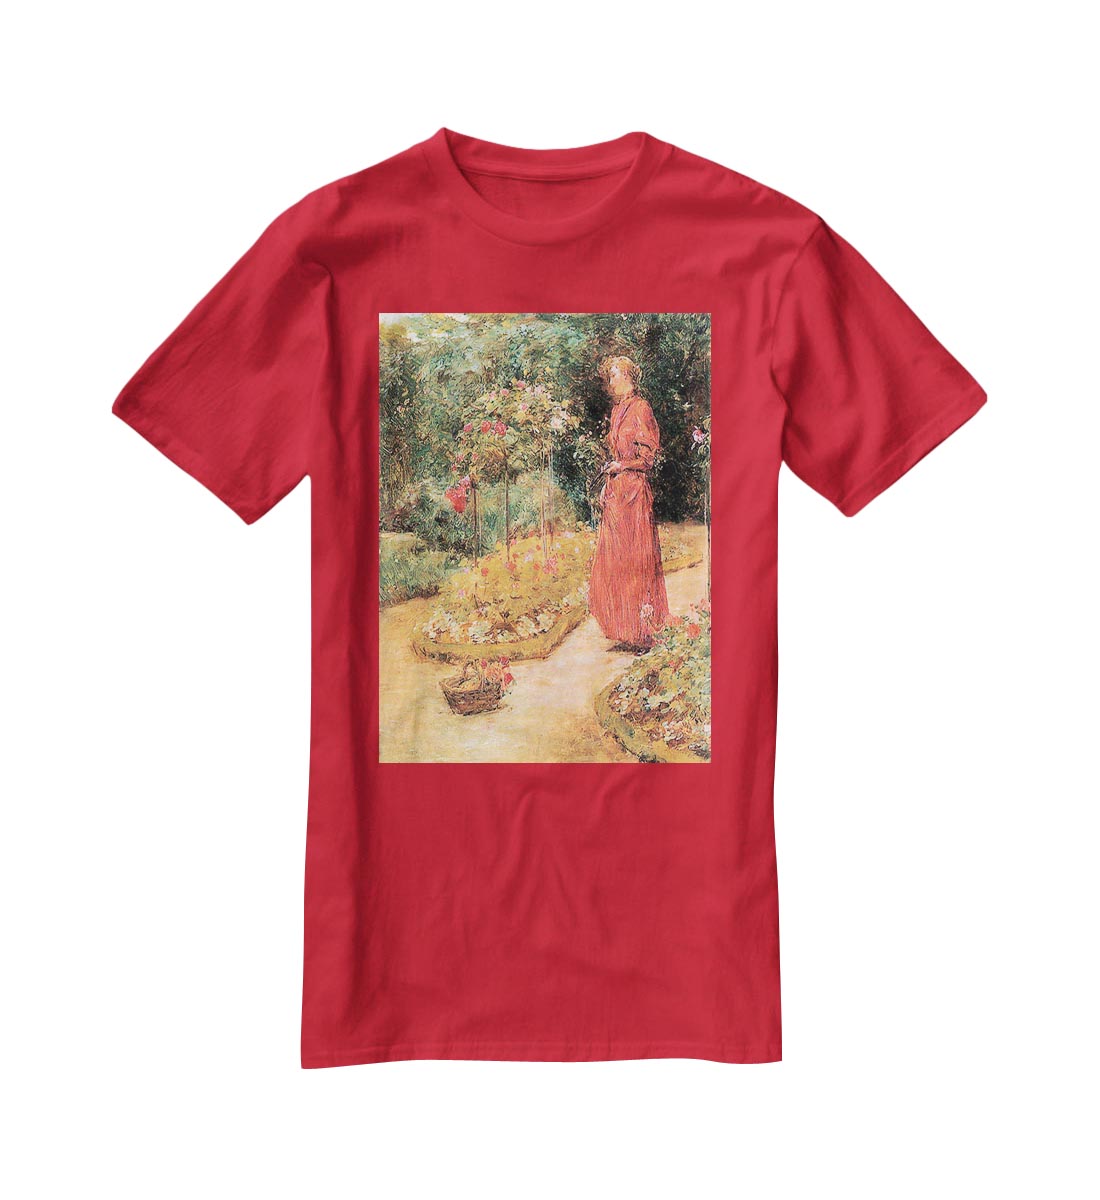 Woman cuts roses in a garden by Hassam T-Shirt - Canvas Art Rocks - 4